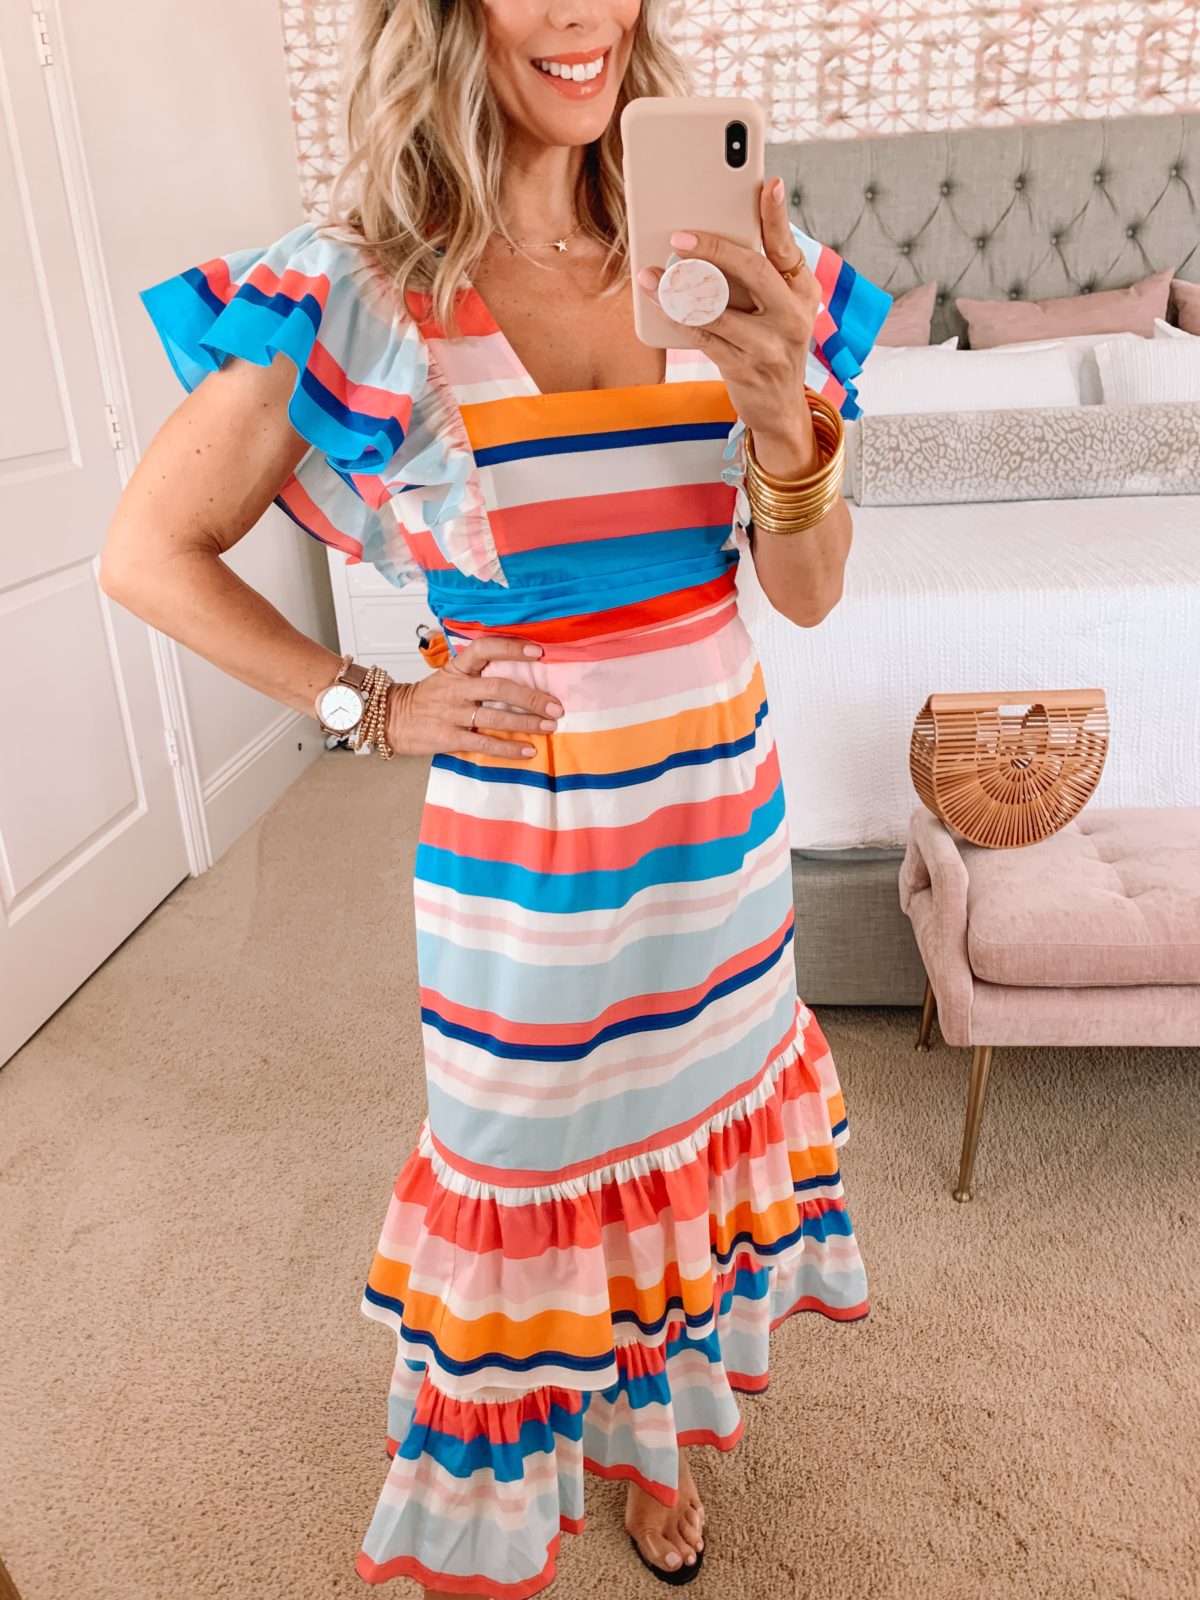 Dressing Room Finds, Striped Dress, Bamboo Clutch, Clear Sandals 